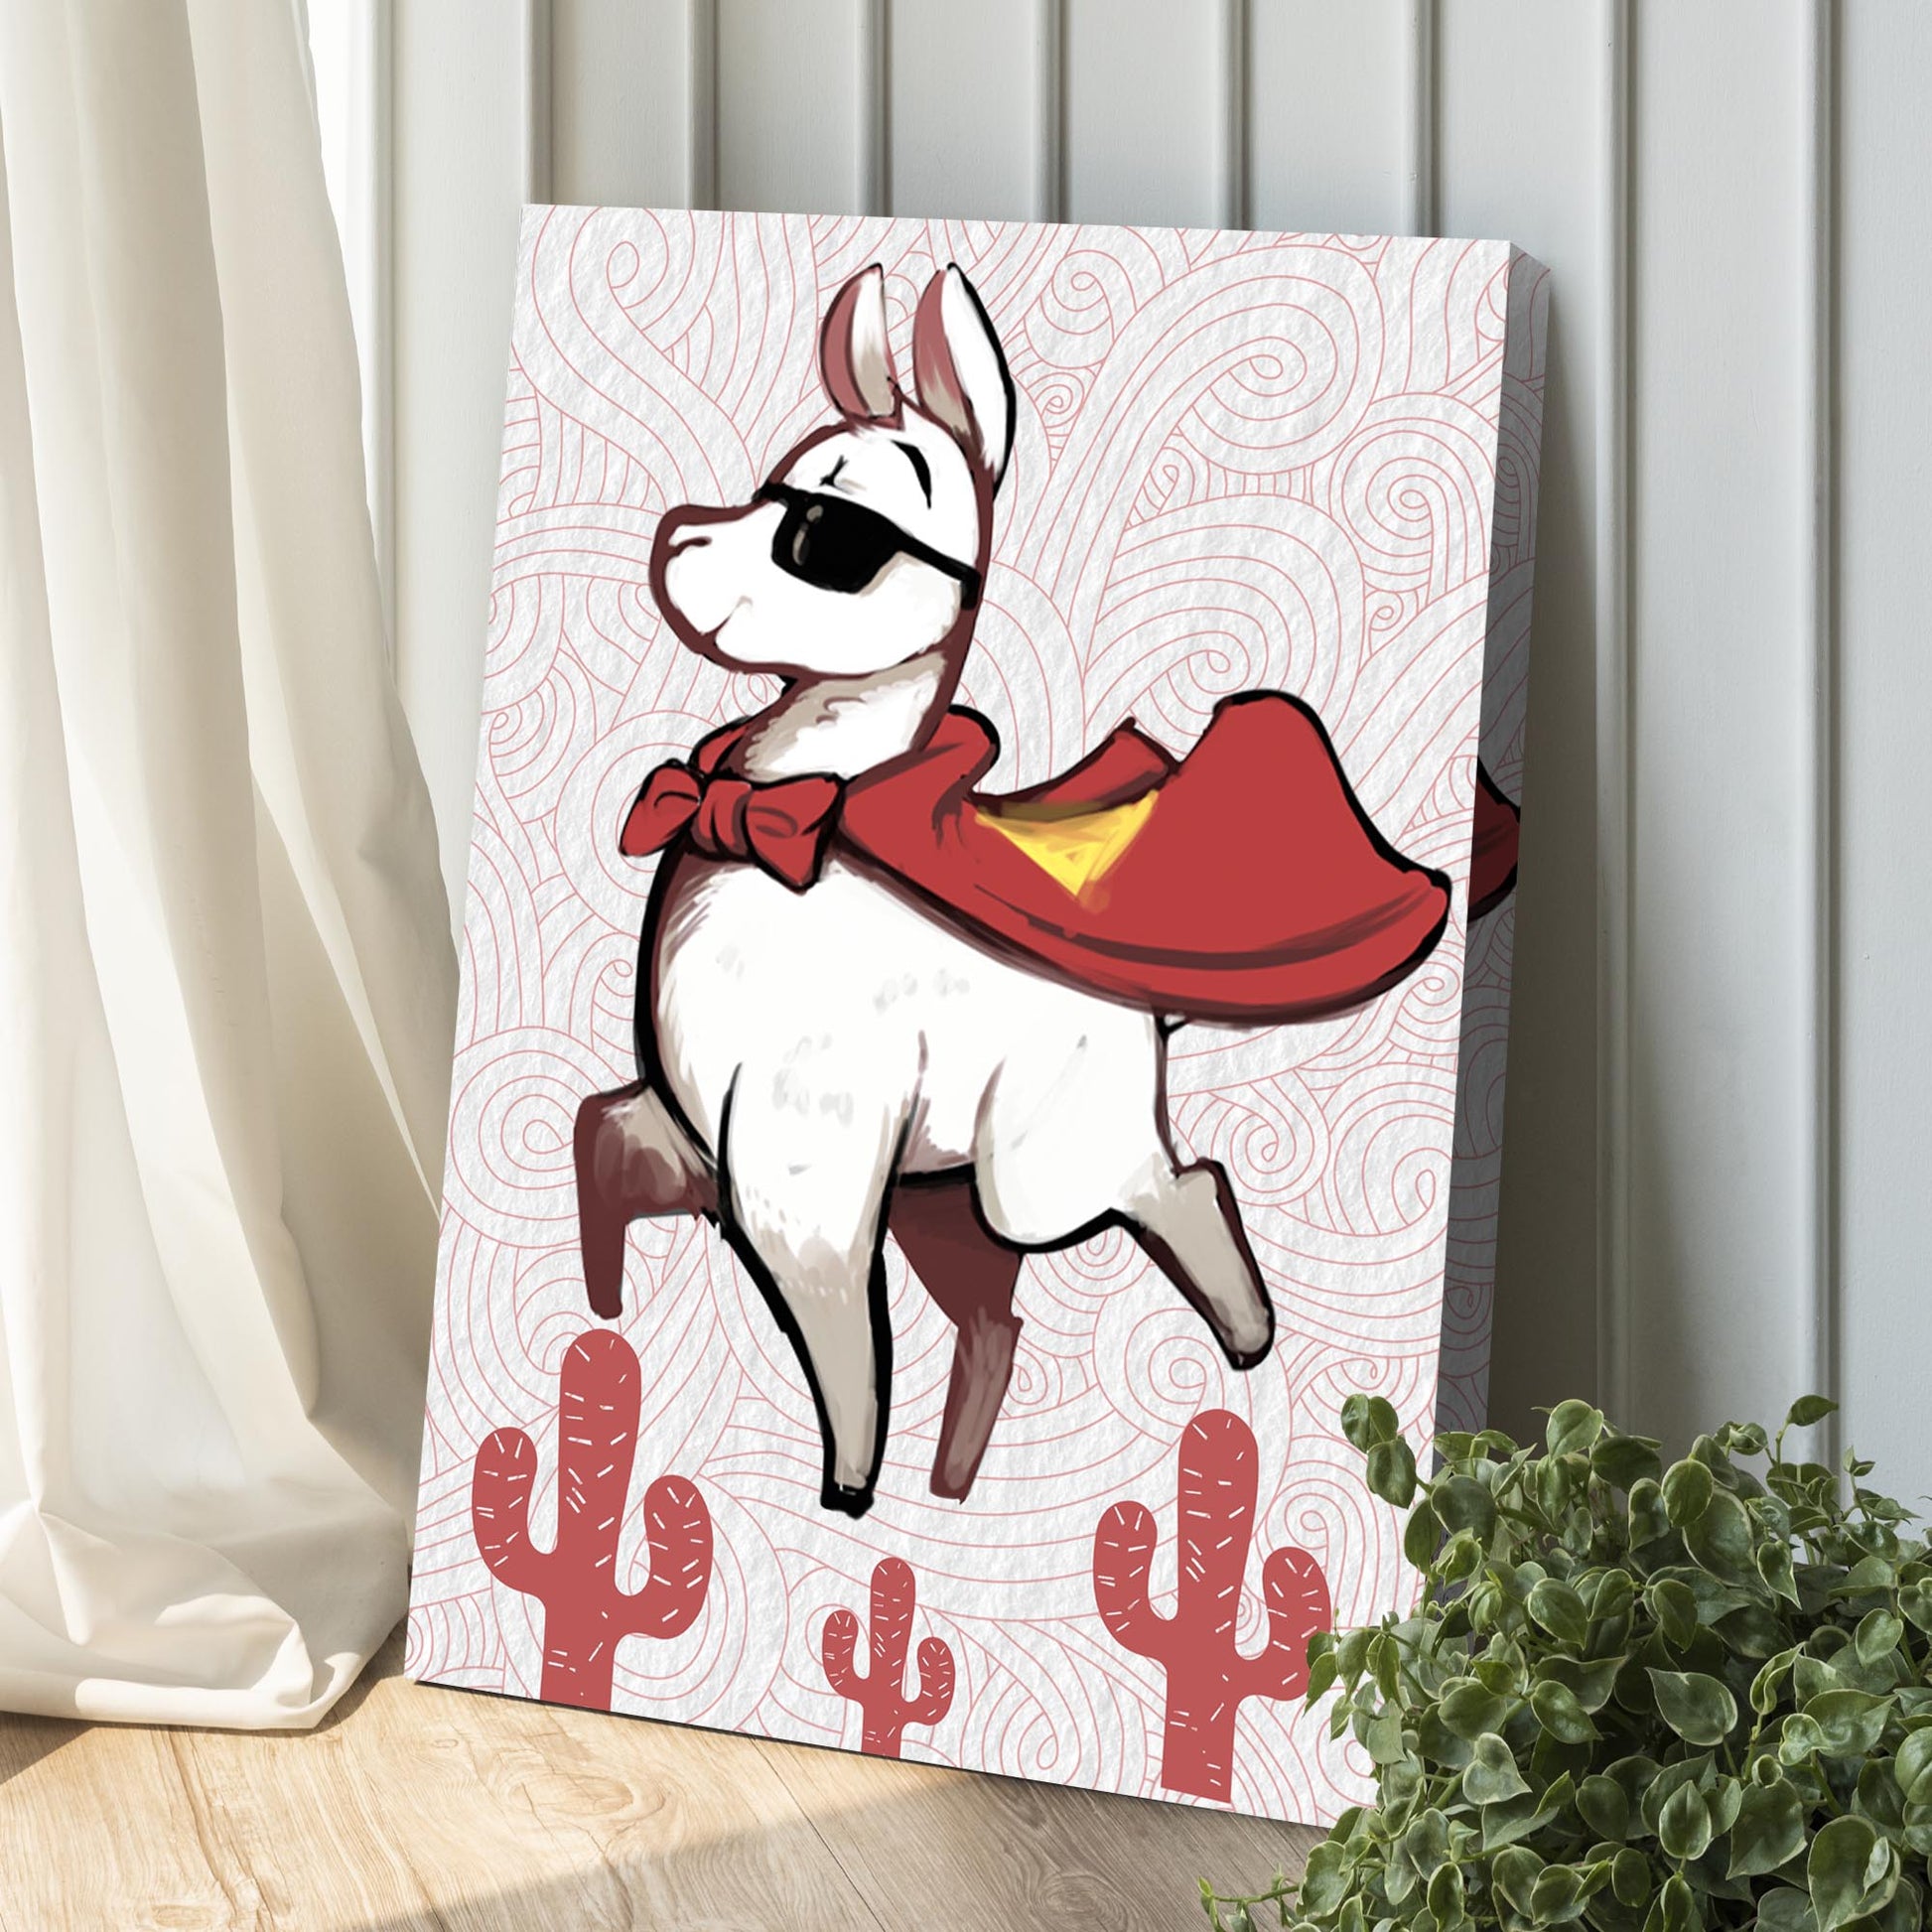 Cute Superhero Llama Portrait Canvas Wall Art Style 1 - Image by Tailored Canvases